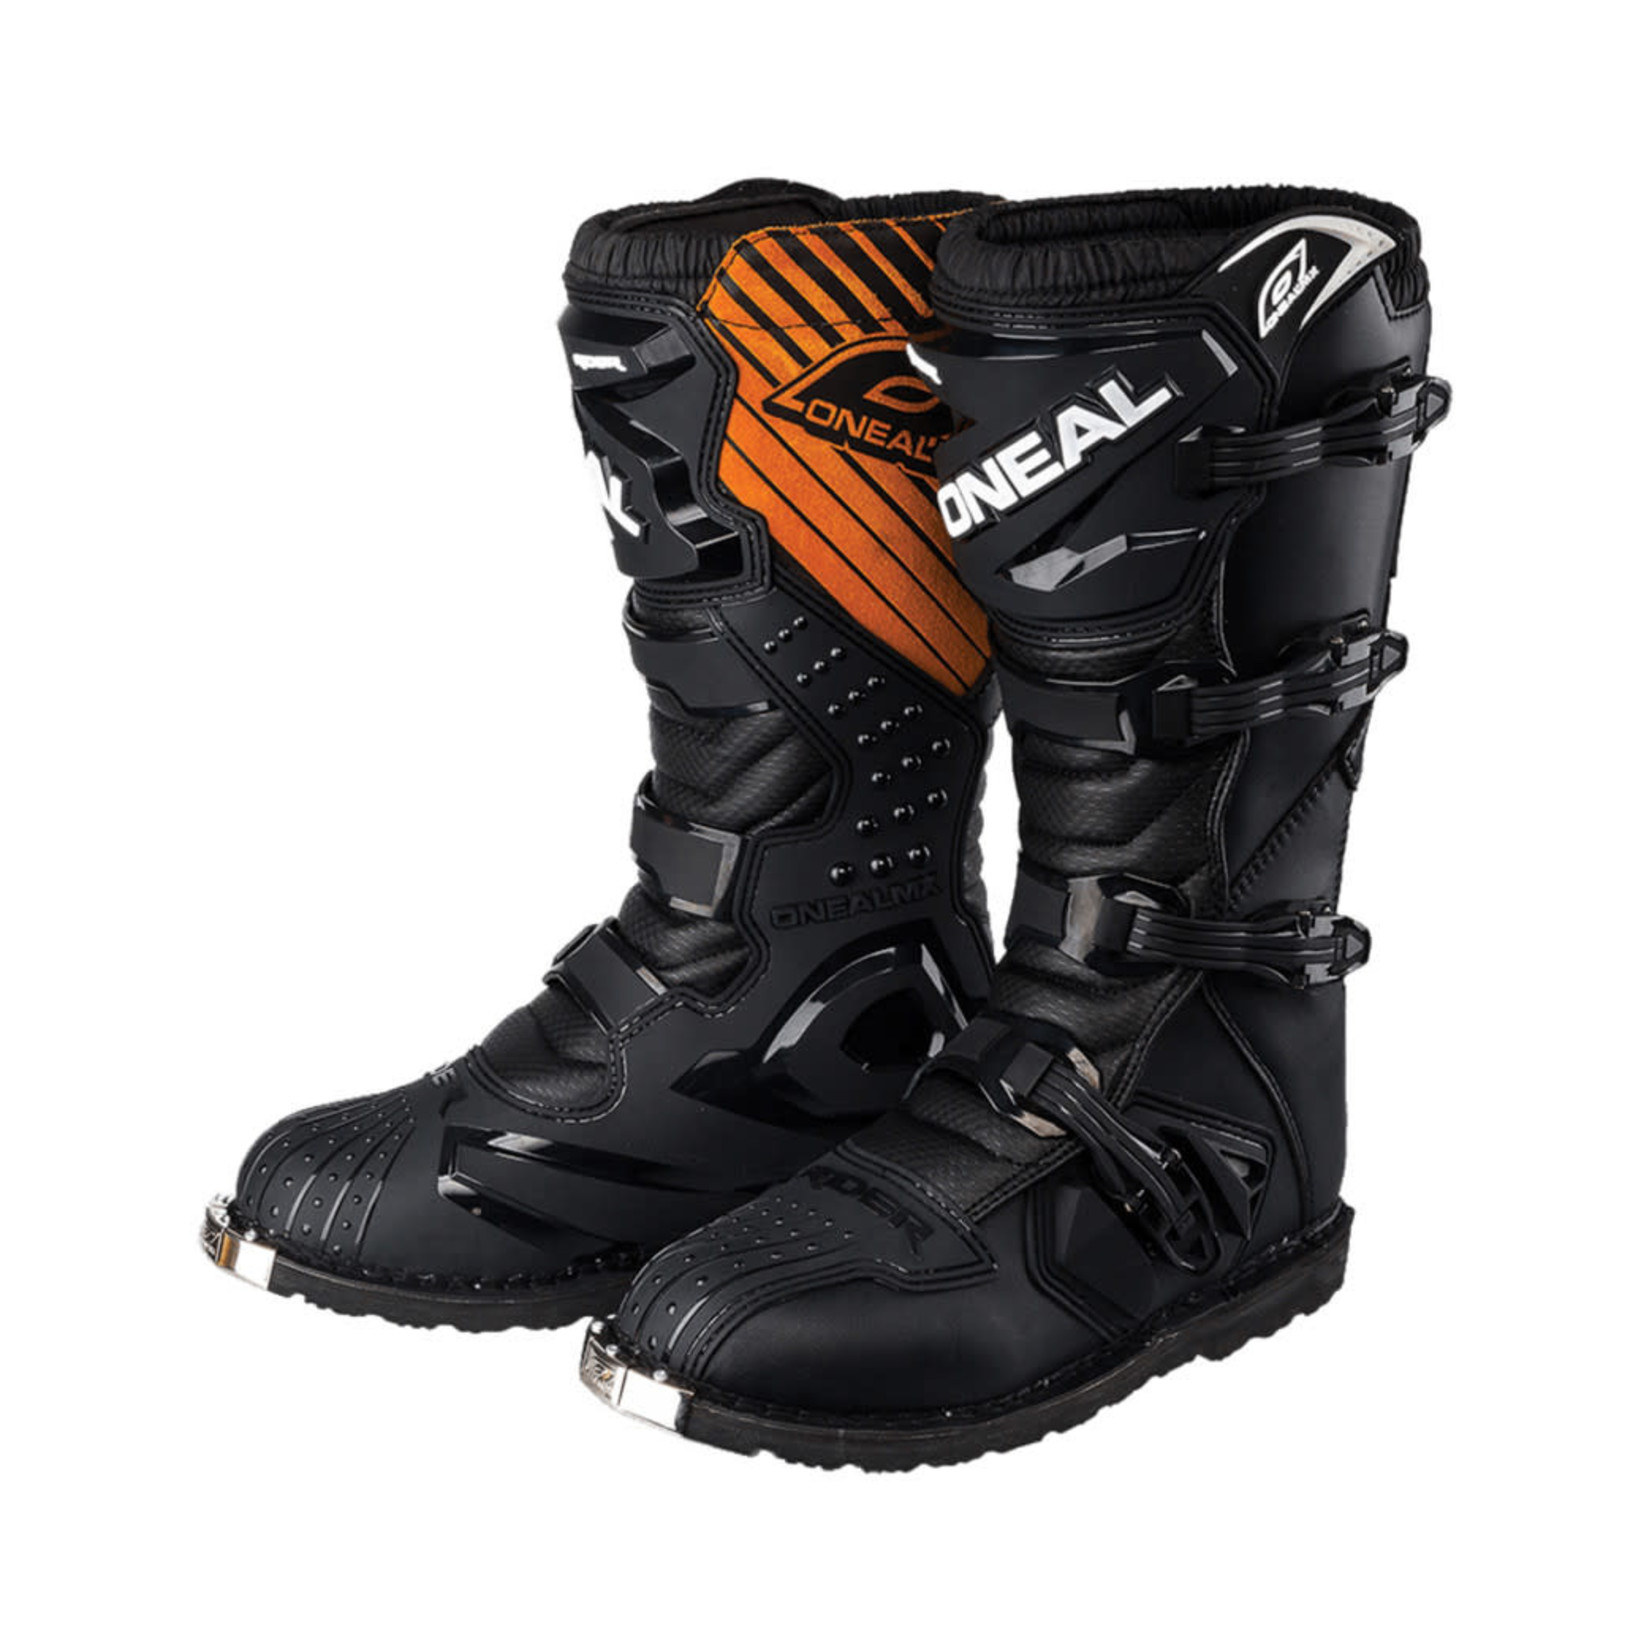 Oneal Oneal Rider bottes d'enduro/cross